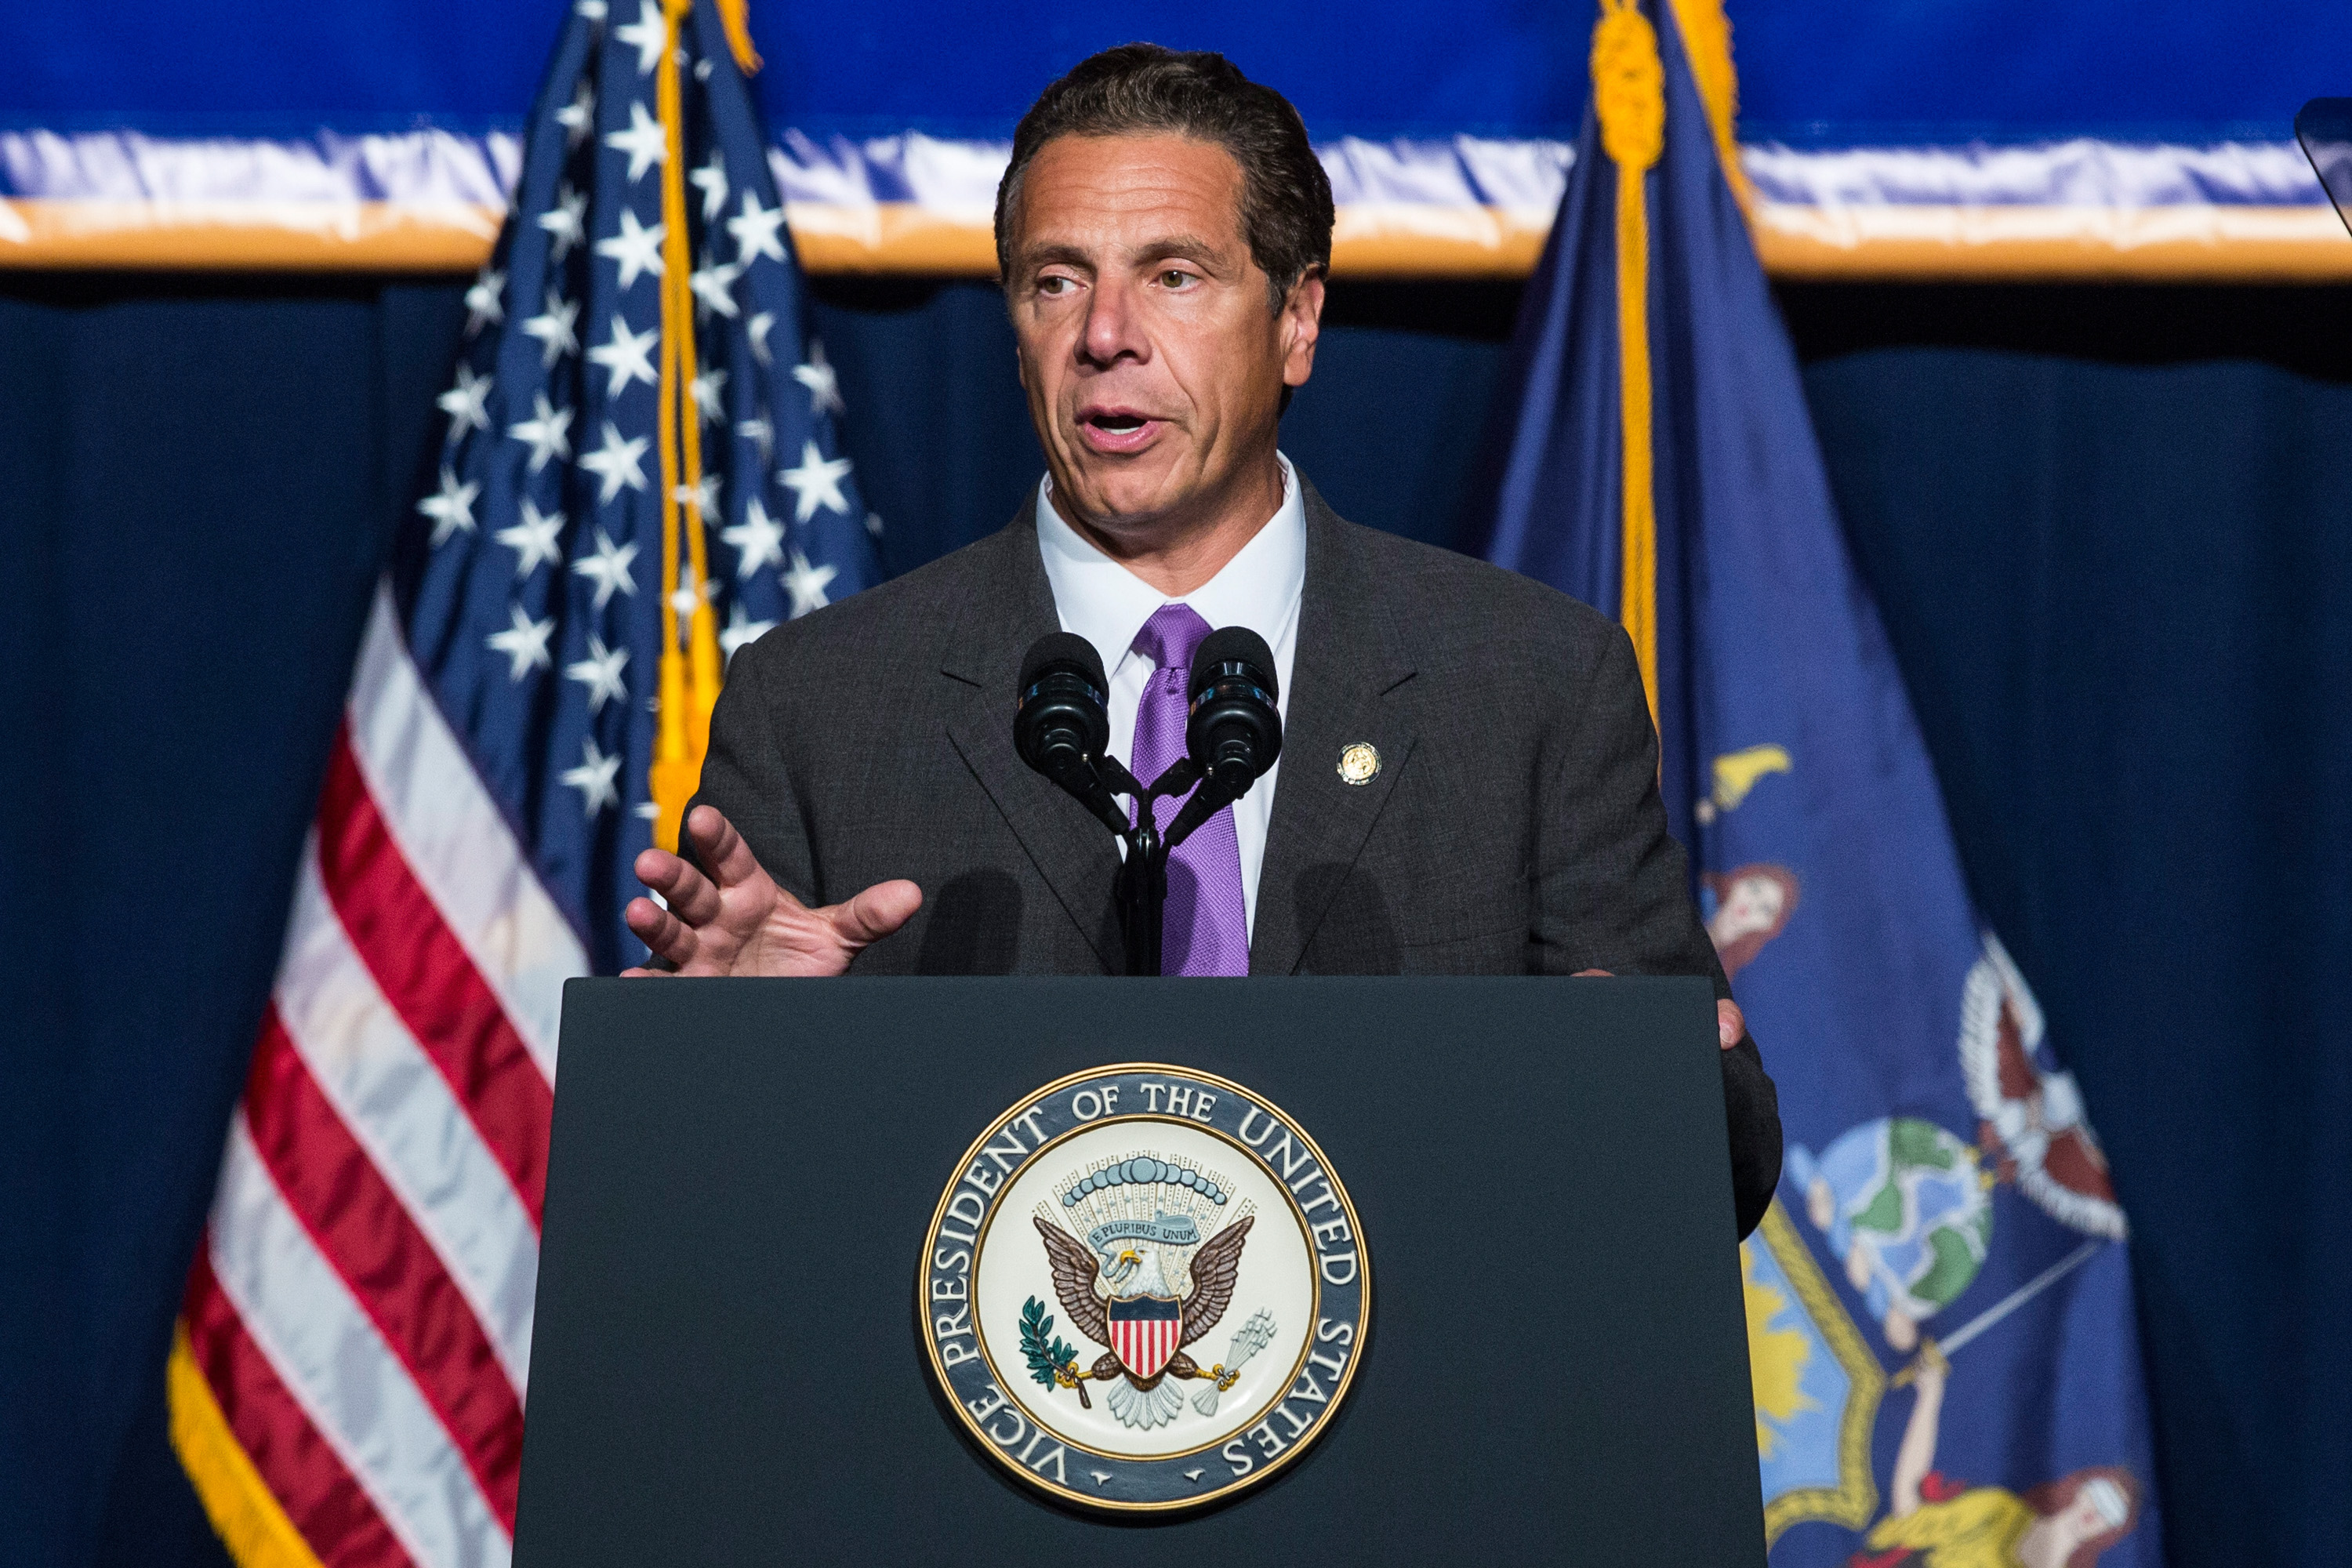 New York Governor Andrew Cuomo announces his support to raise the minimum wage for the state of New York to $15 per hour on Sept. 10, 2015. (Andrew Burton—Getty Images)